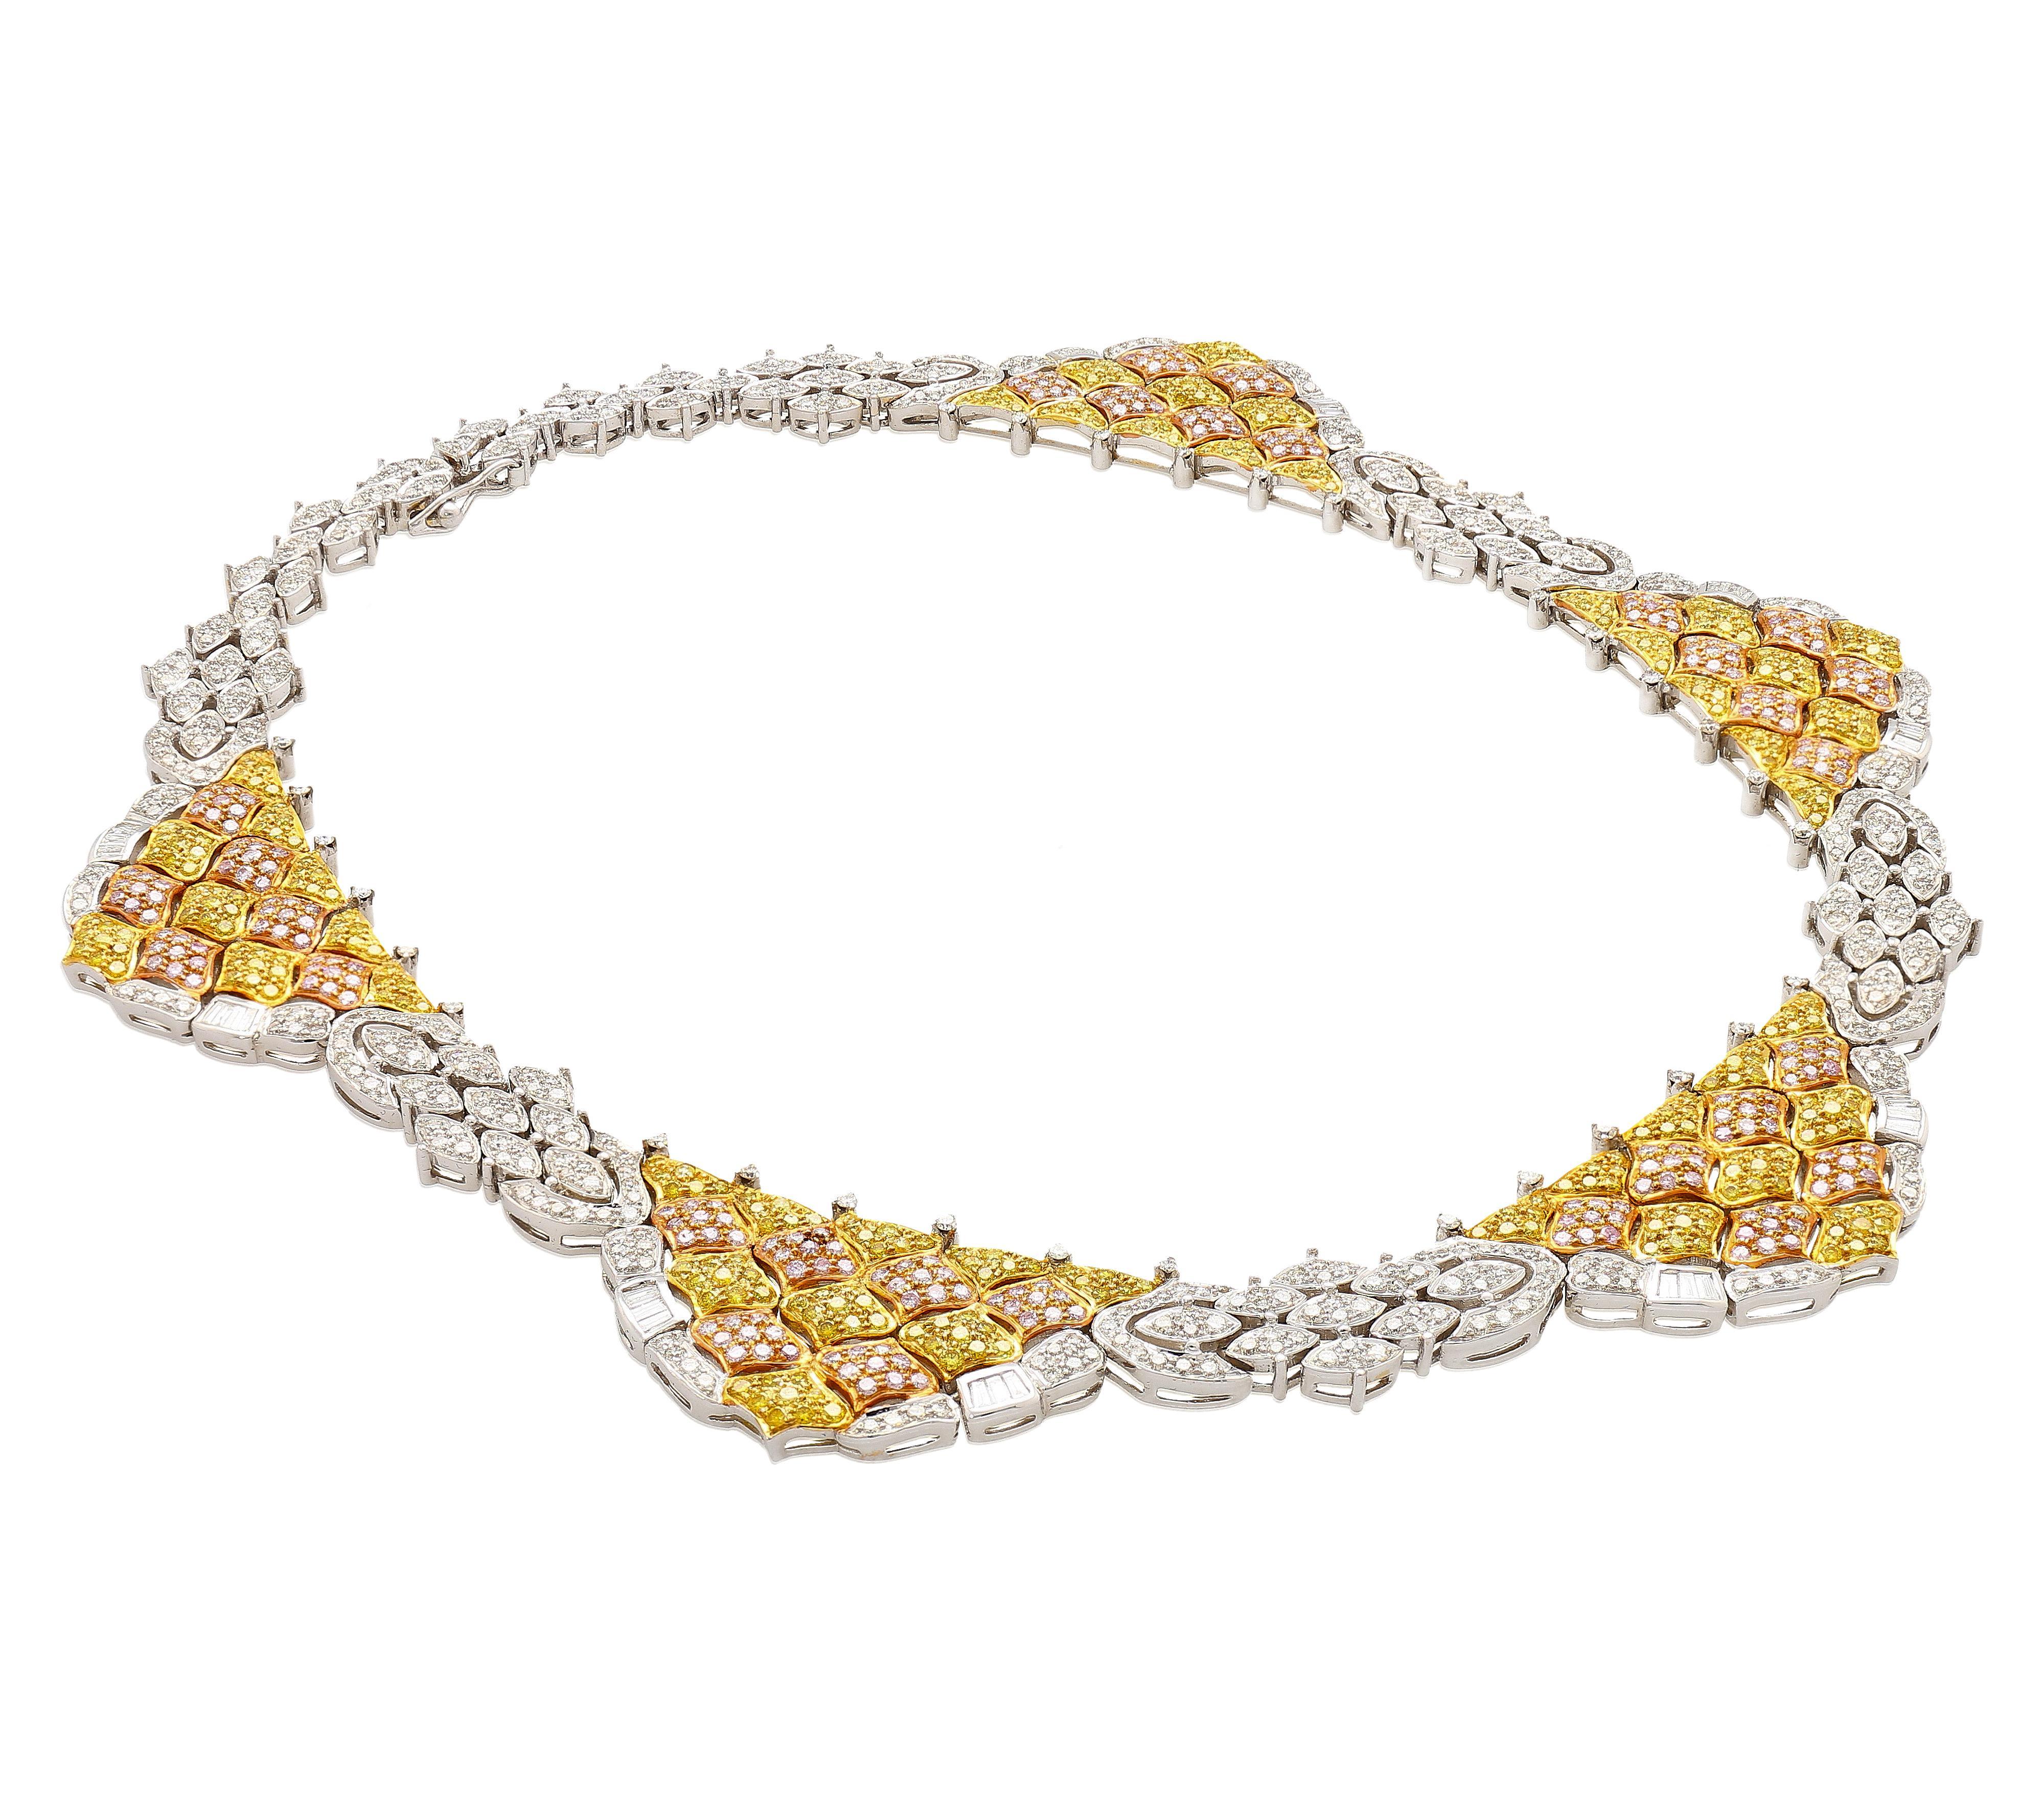 35 Carat Natural Pink, White, & Yellow Diamond Pave Necklace Choker in 18K Three-Tone Gold. 

An intricate necklace featuring a hand linked display of multi colored diamonds that total 35.50 carats. The diamonds consist of round-cut white, yellow,